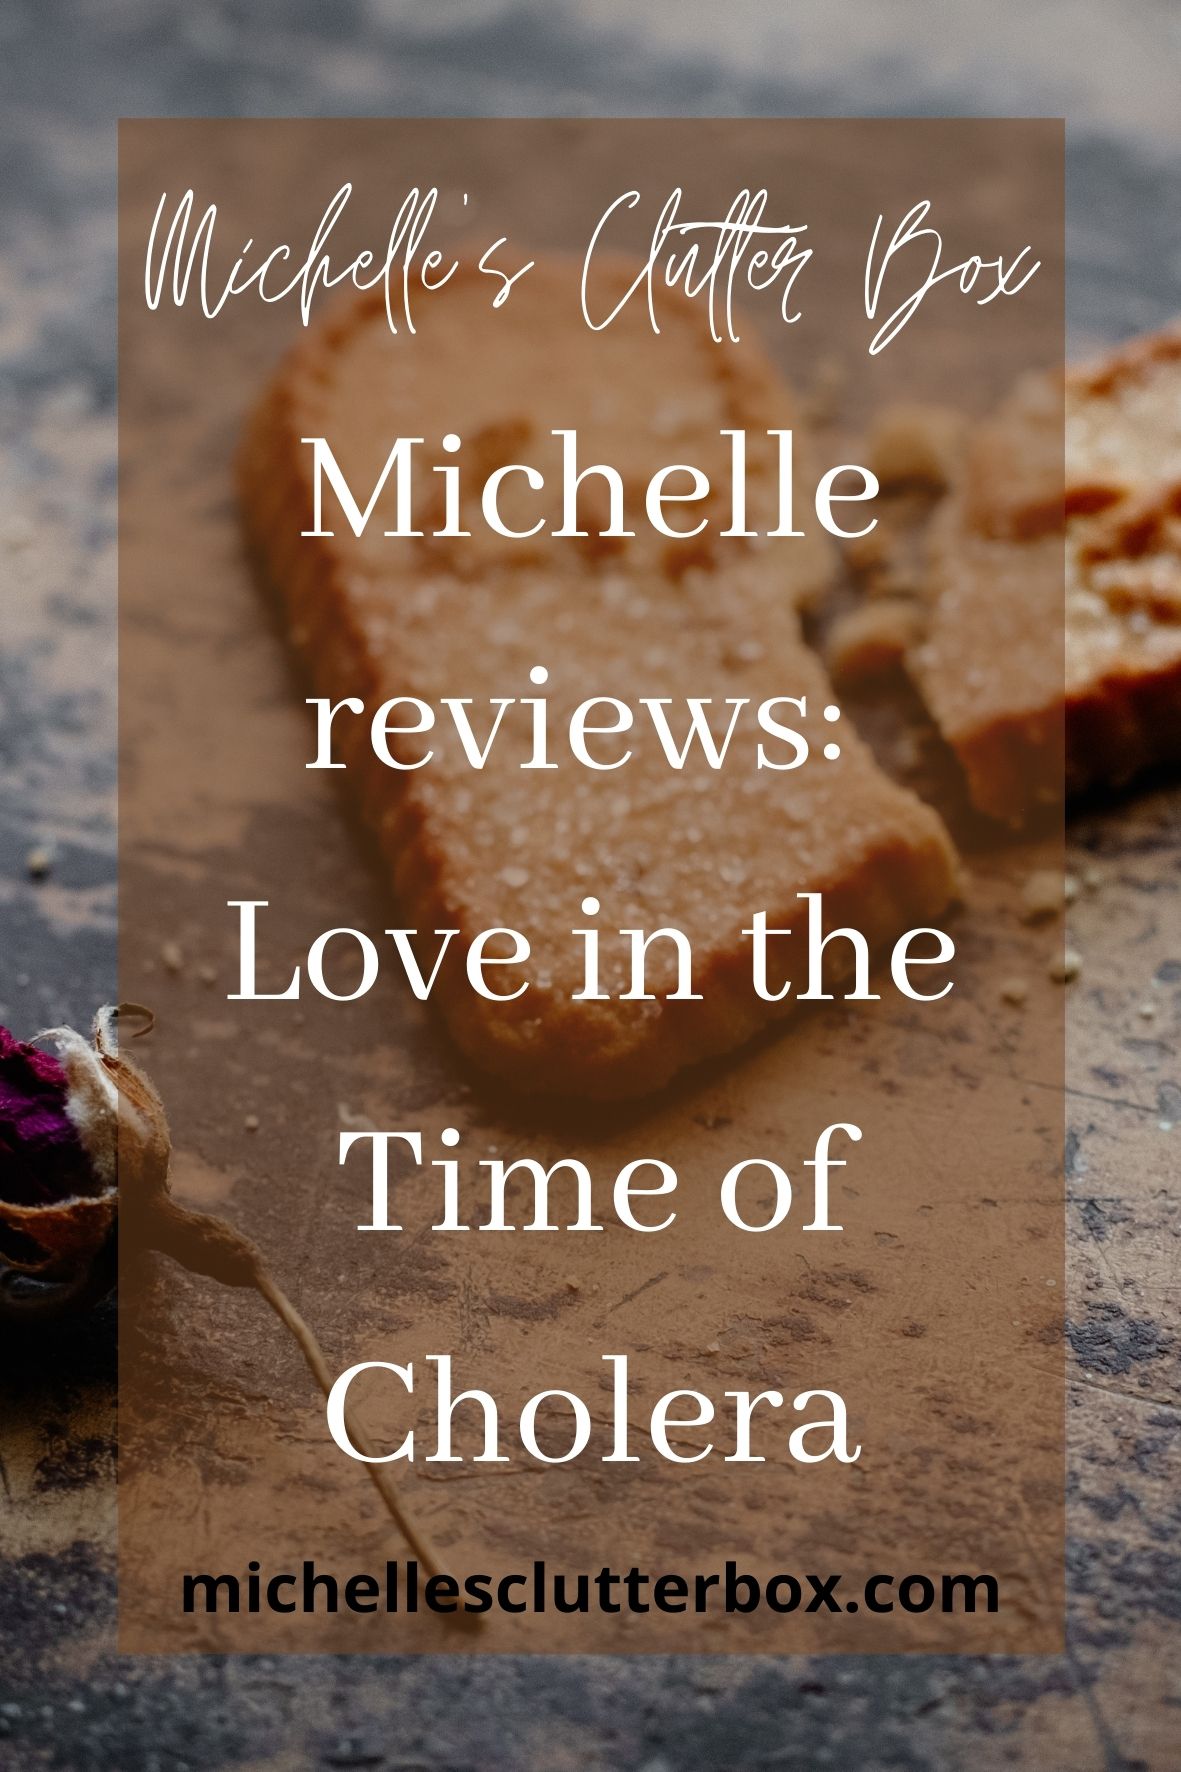 Love in the time of Cholera